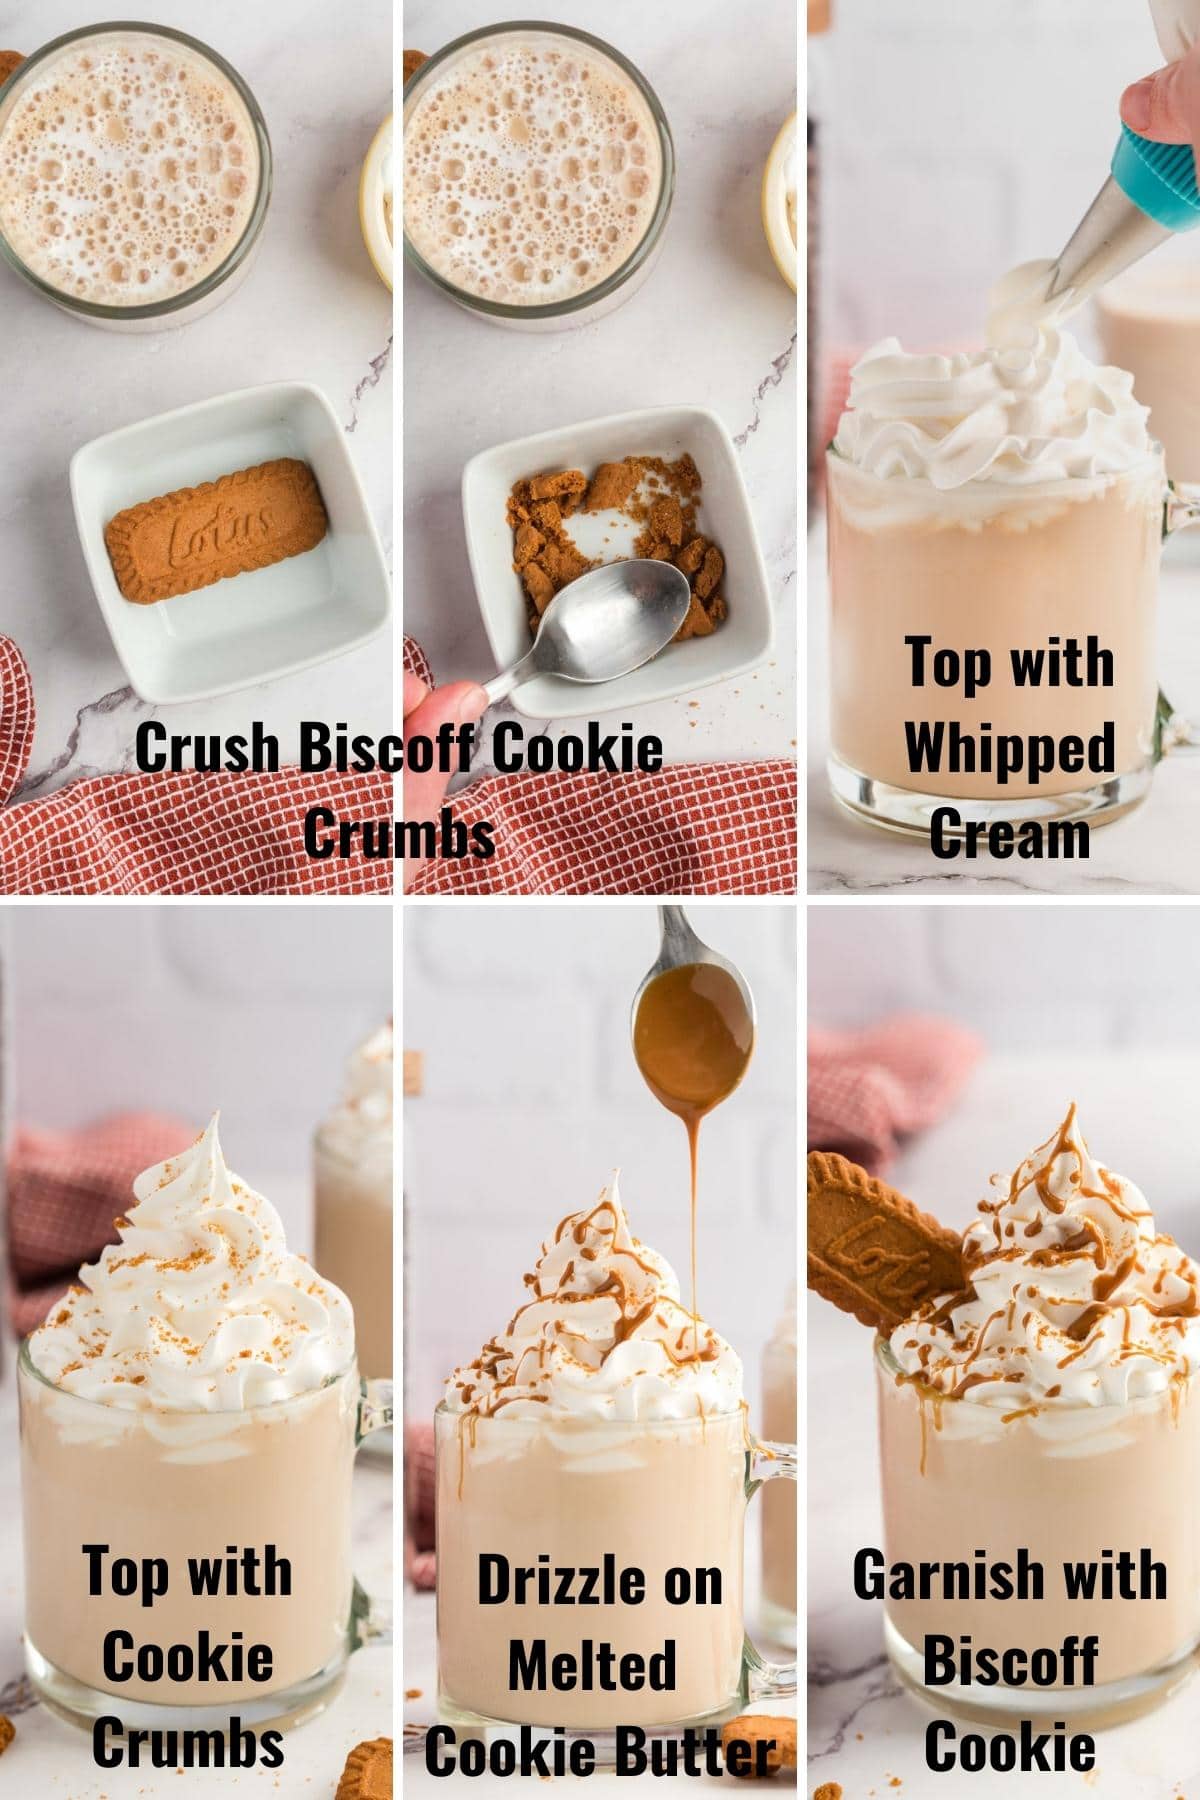 Collage image adding garnish of whipped cream, cookie butter crumbs, melted cookie butter, and a whole Biscoff cookie to top of latte.